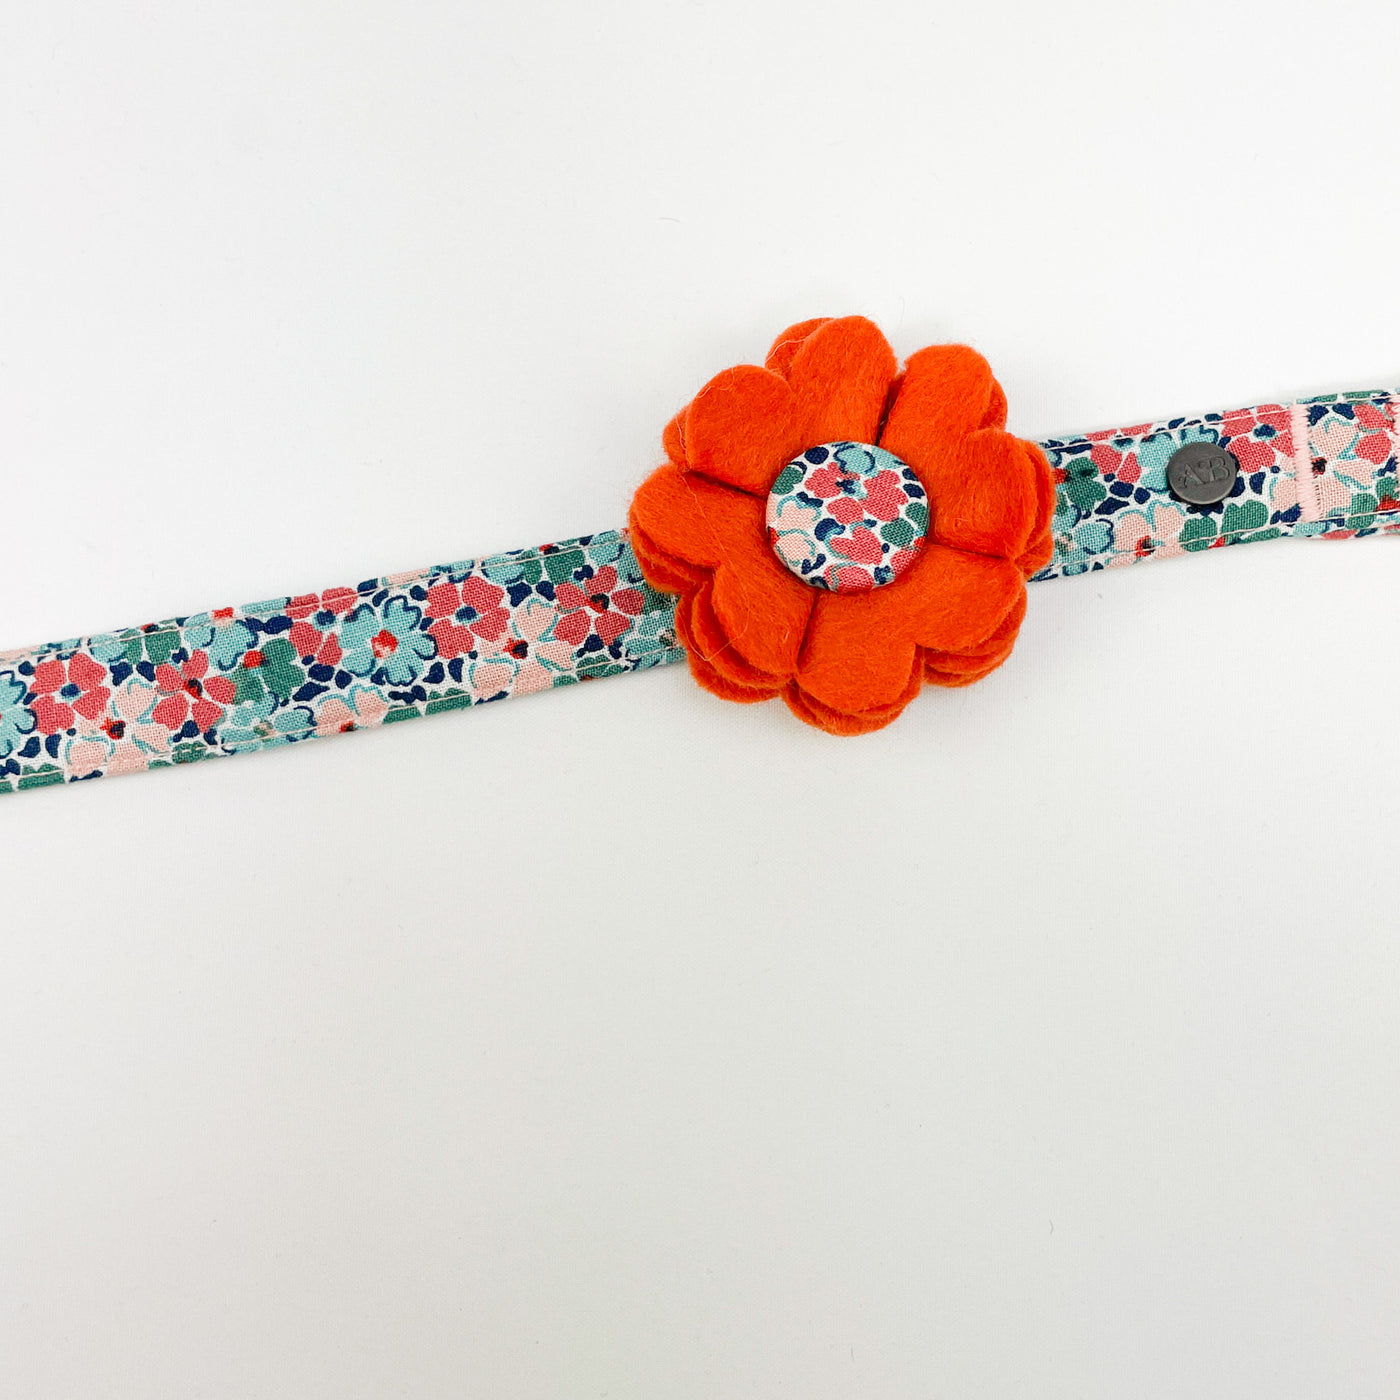 Dog Collar Flower Accessory in orange felt with a Liberty Fabric Button shown on Liberty collar.